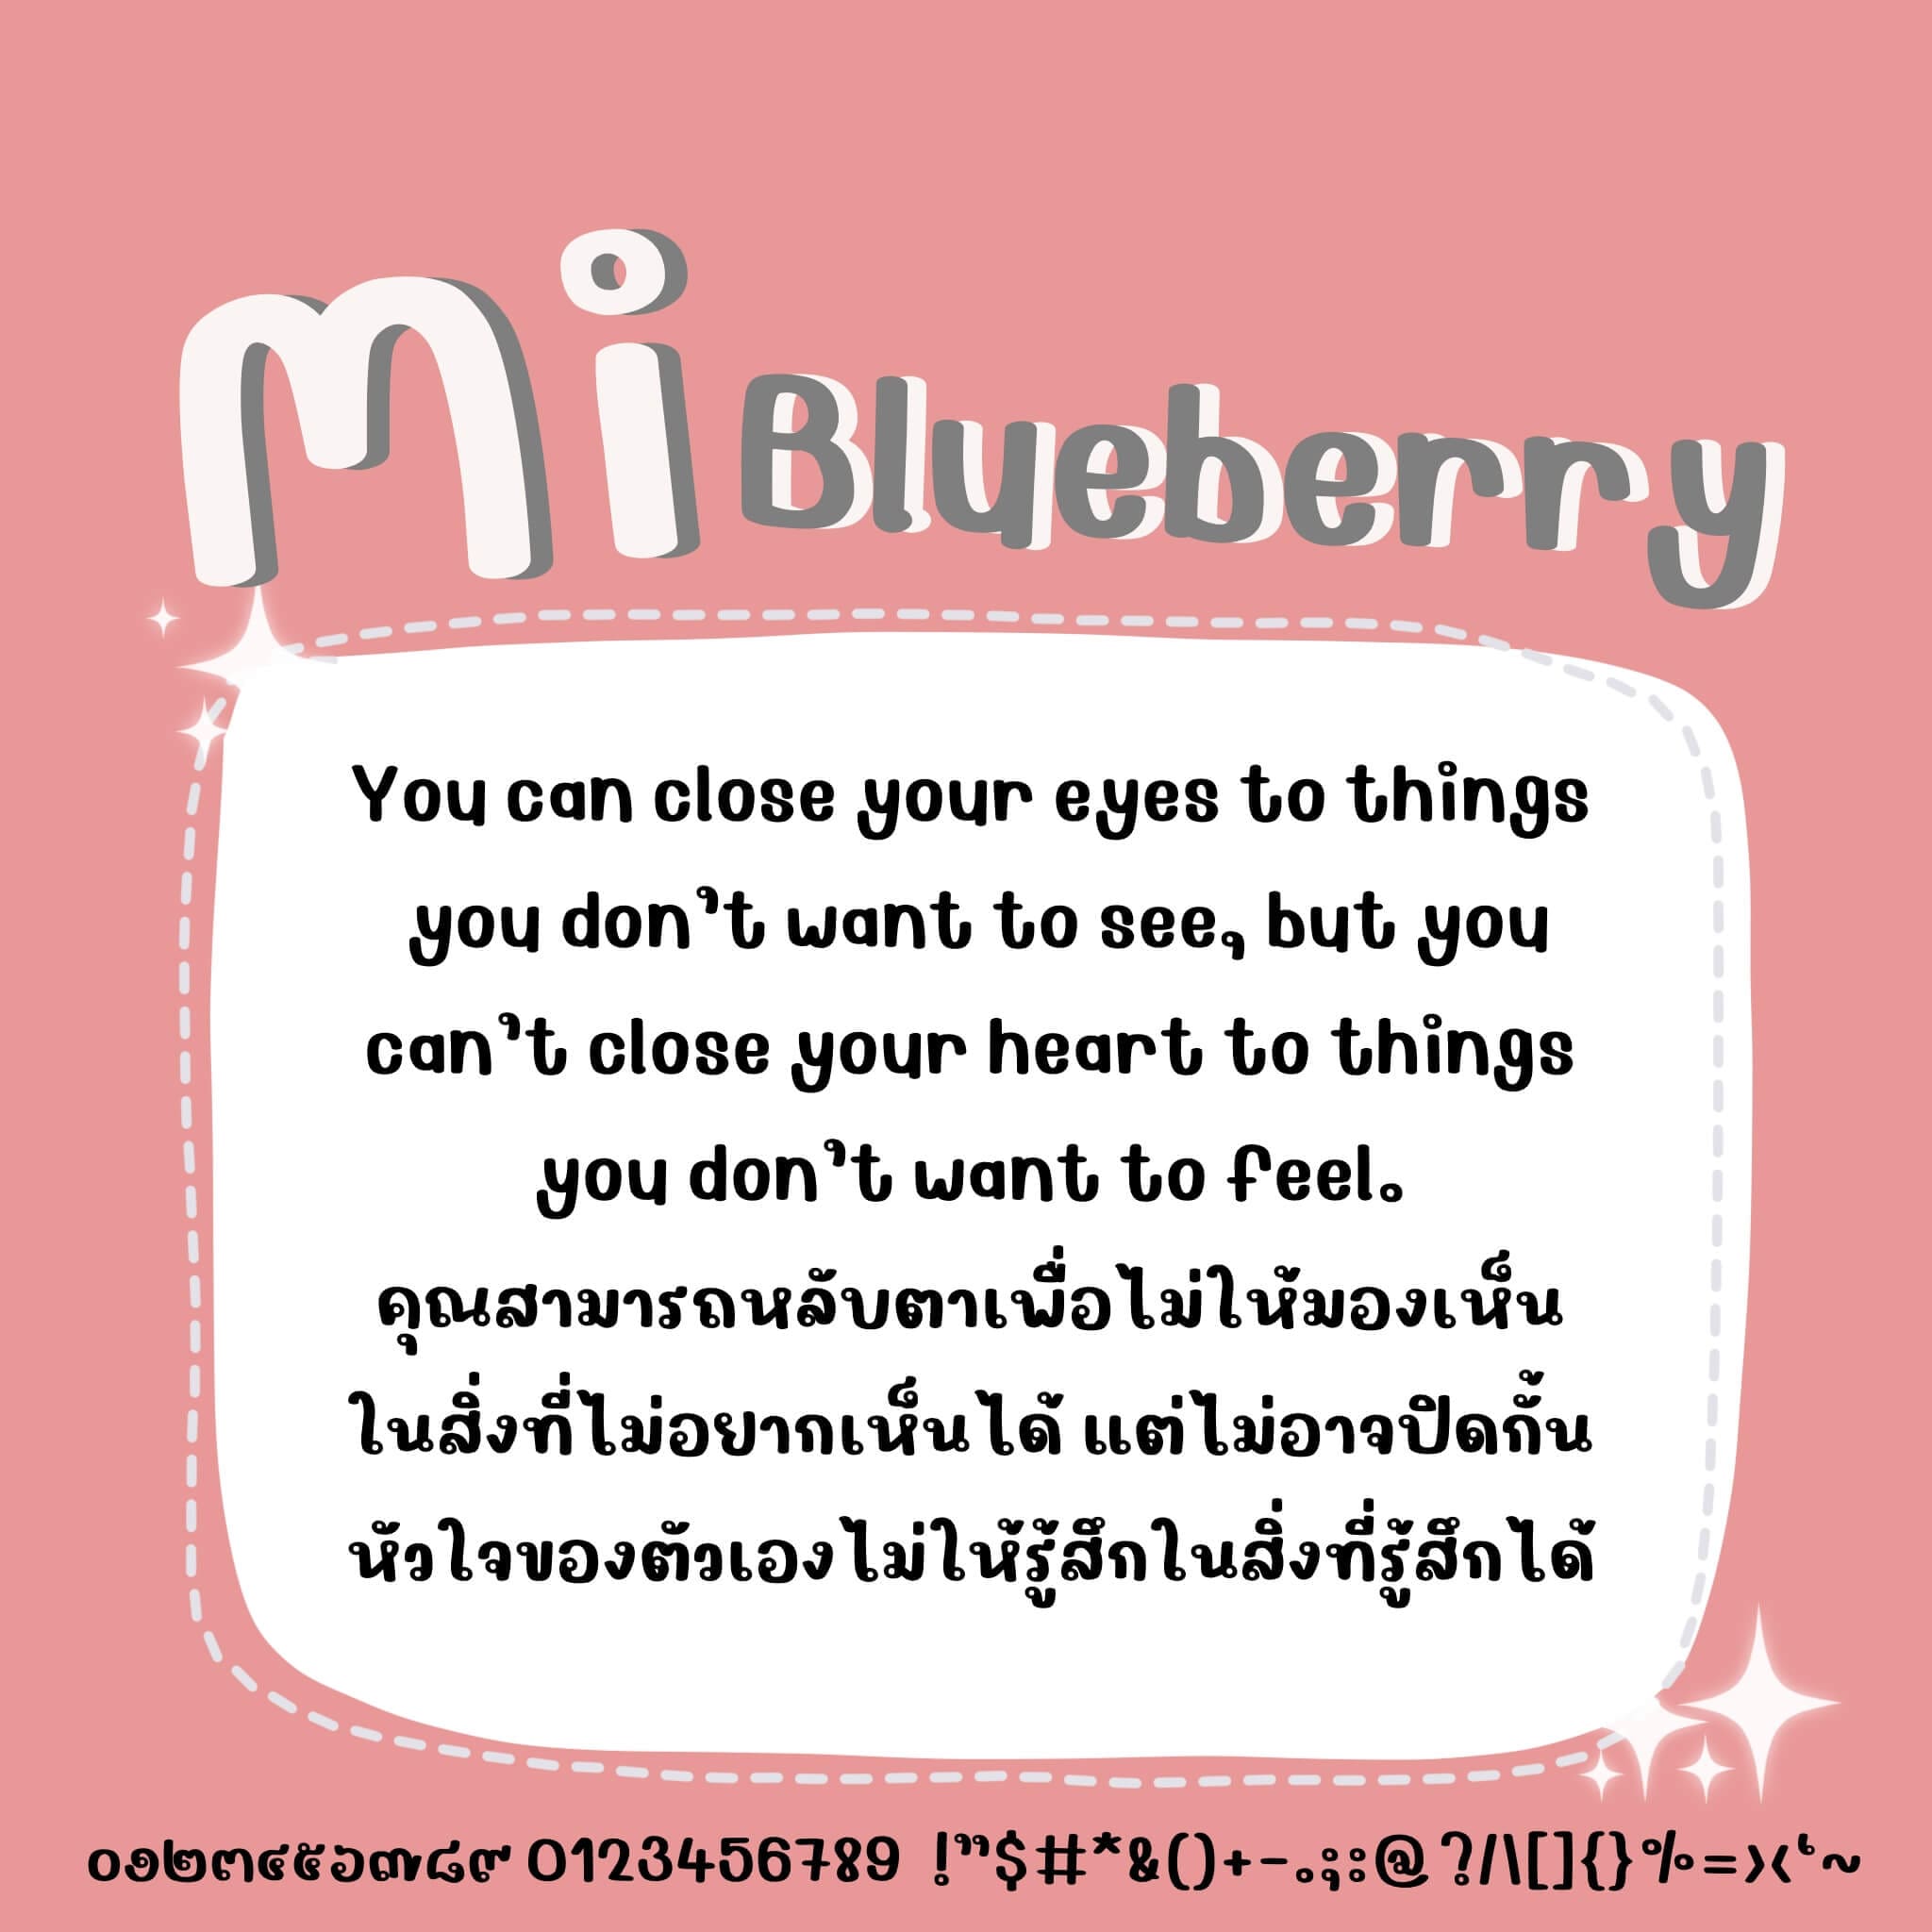 Mibluaberry